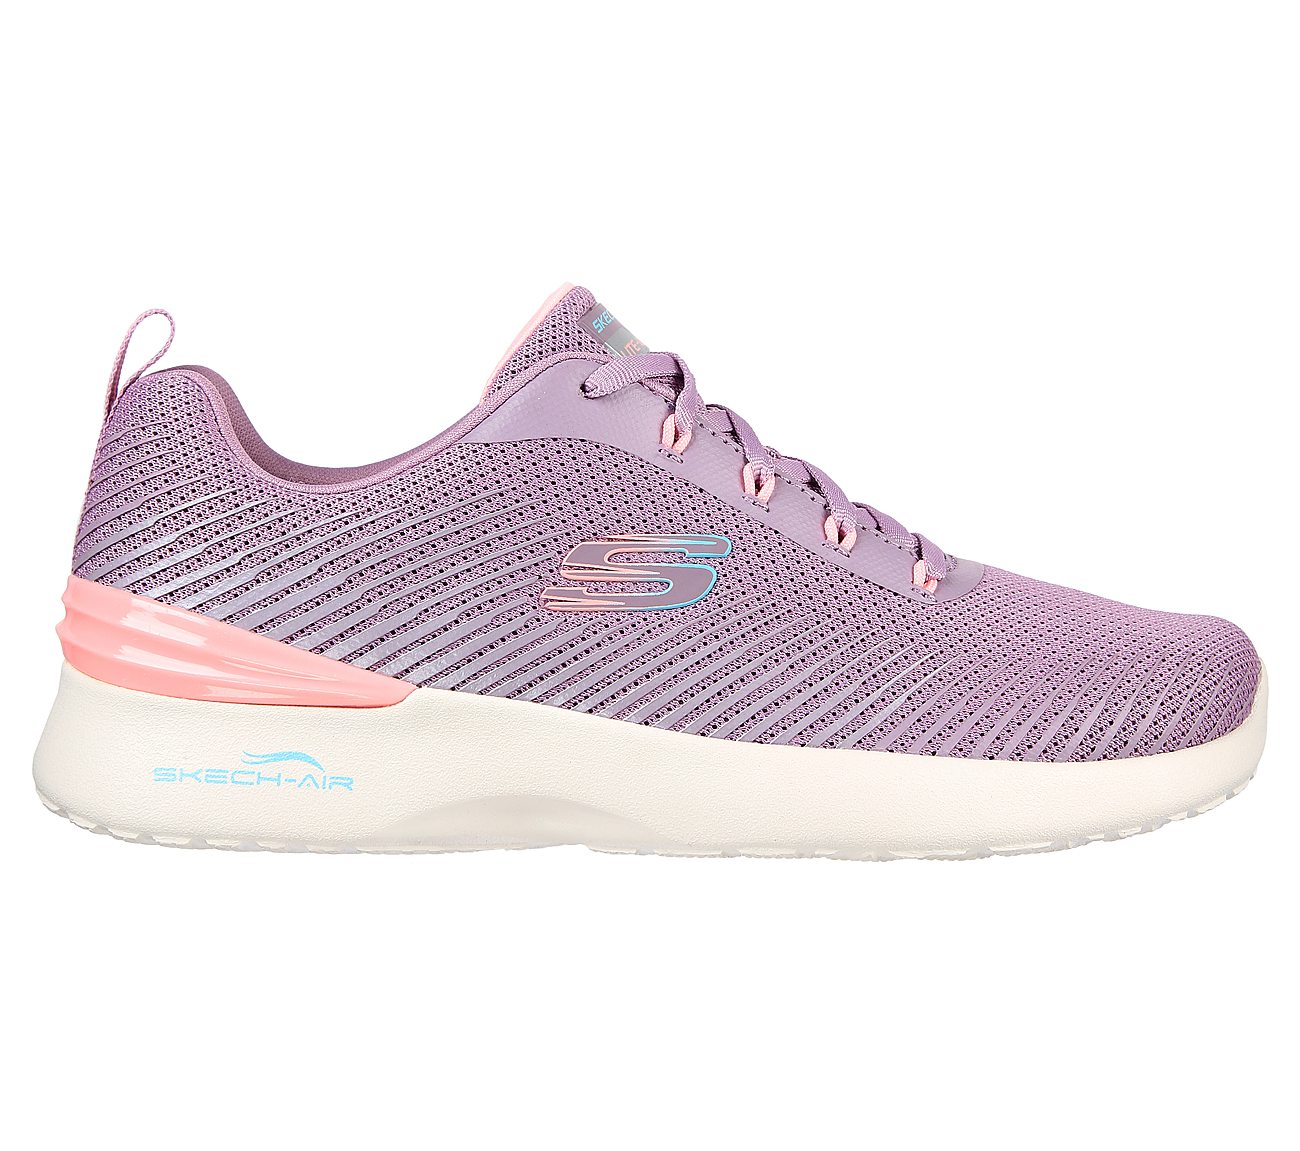 SKECH-AIR DYNAMIGHT-LUMINOSIT, MMAUVE Footwear Lateral View